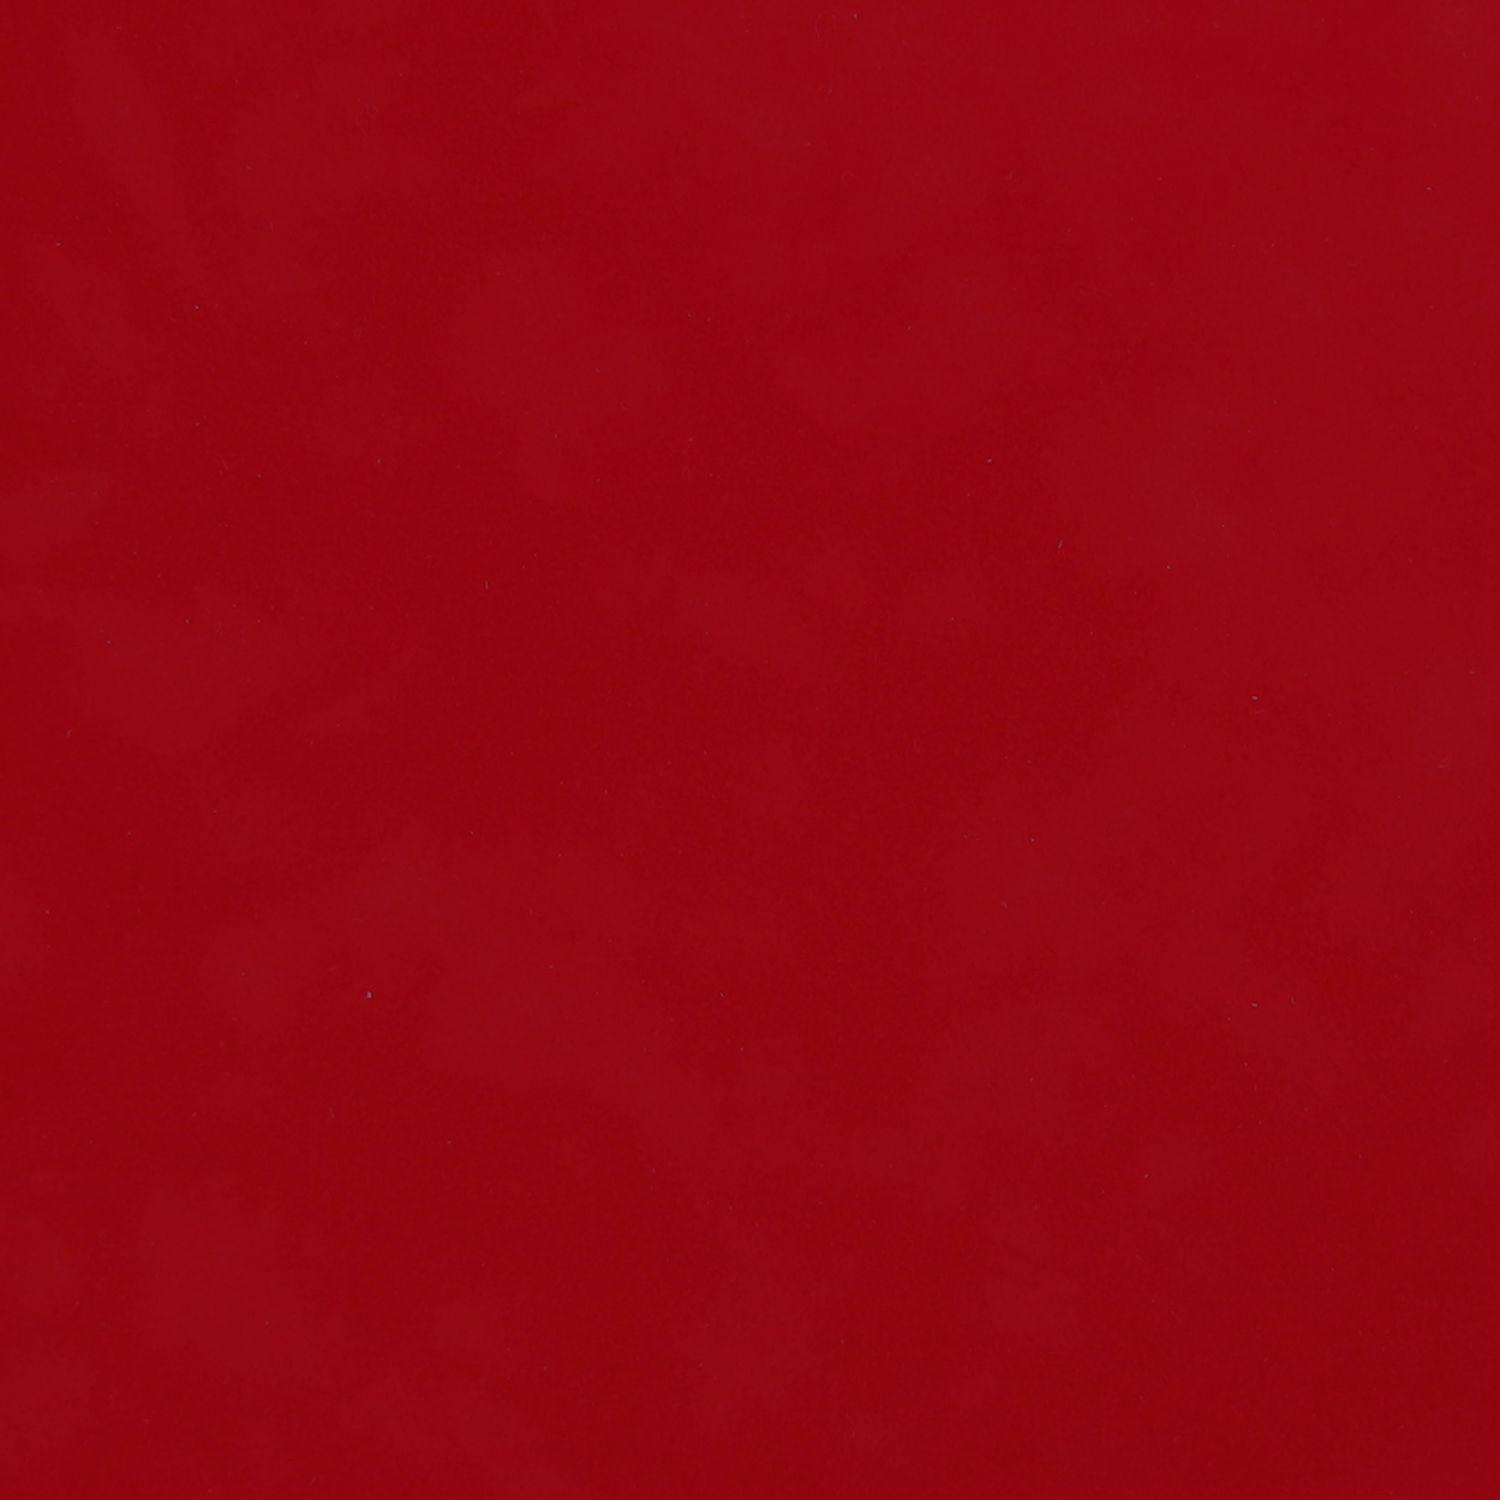 Solid Color Red Background HD Wallpaper, Background Image